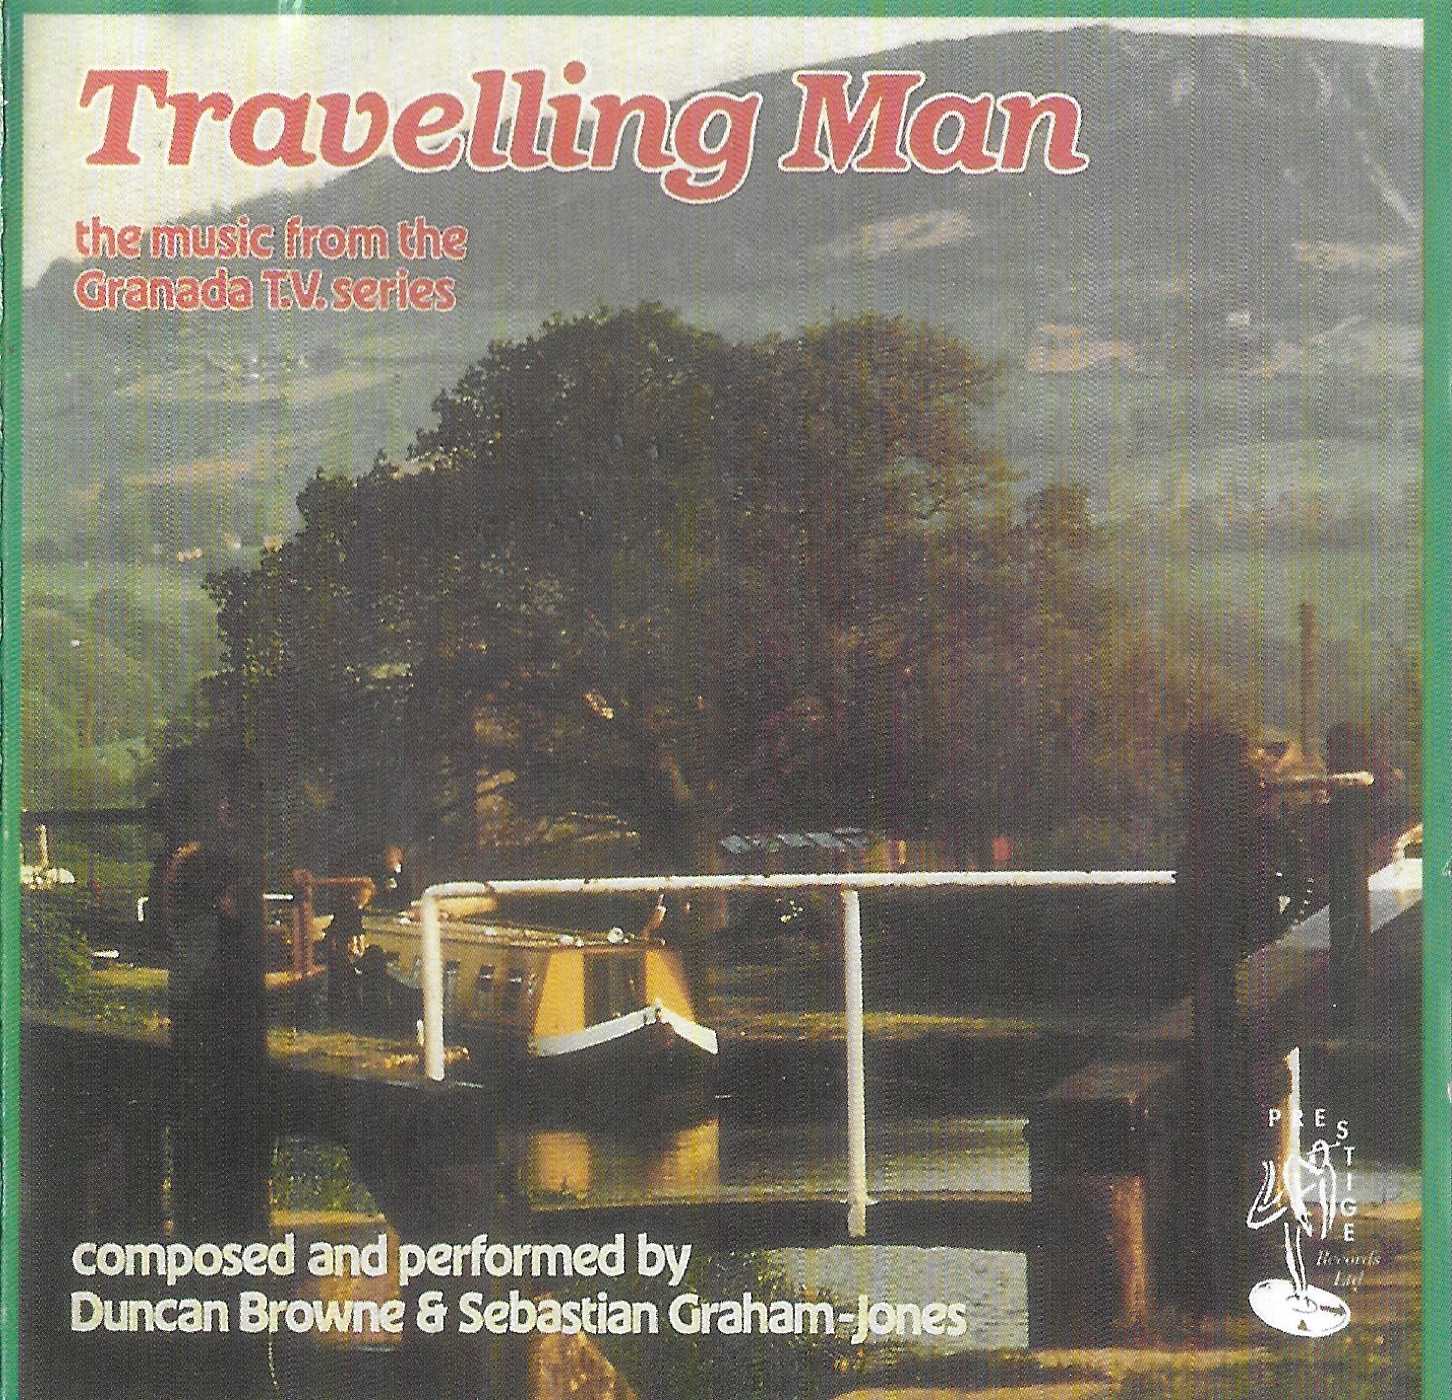 Picture of CDSGP 0114 Travelling man by artist Duncan Browne / Sebastian Graham-Jones from ITV, Channel 4 and Channel 5 cds library